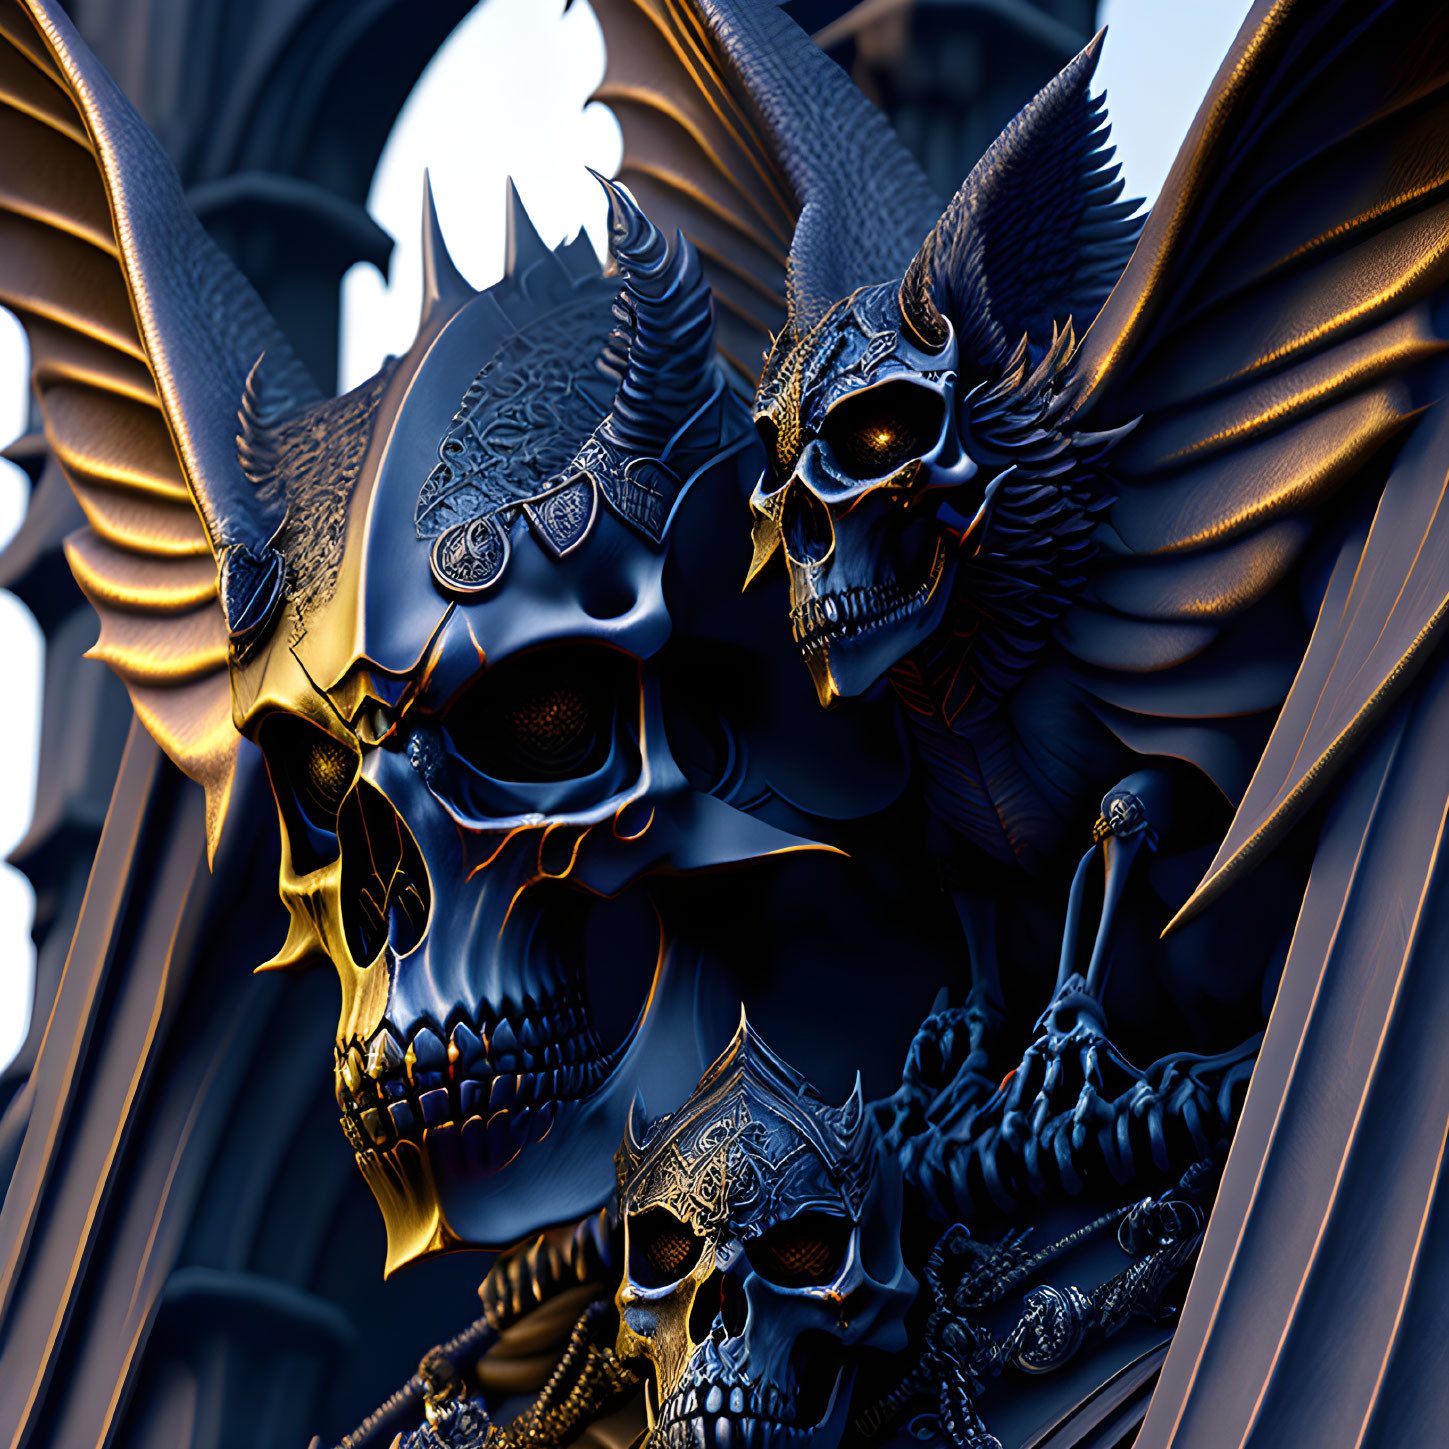 Detailed 3D metallic skull artwork with horns, feathers, gears, and blue tones